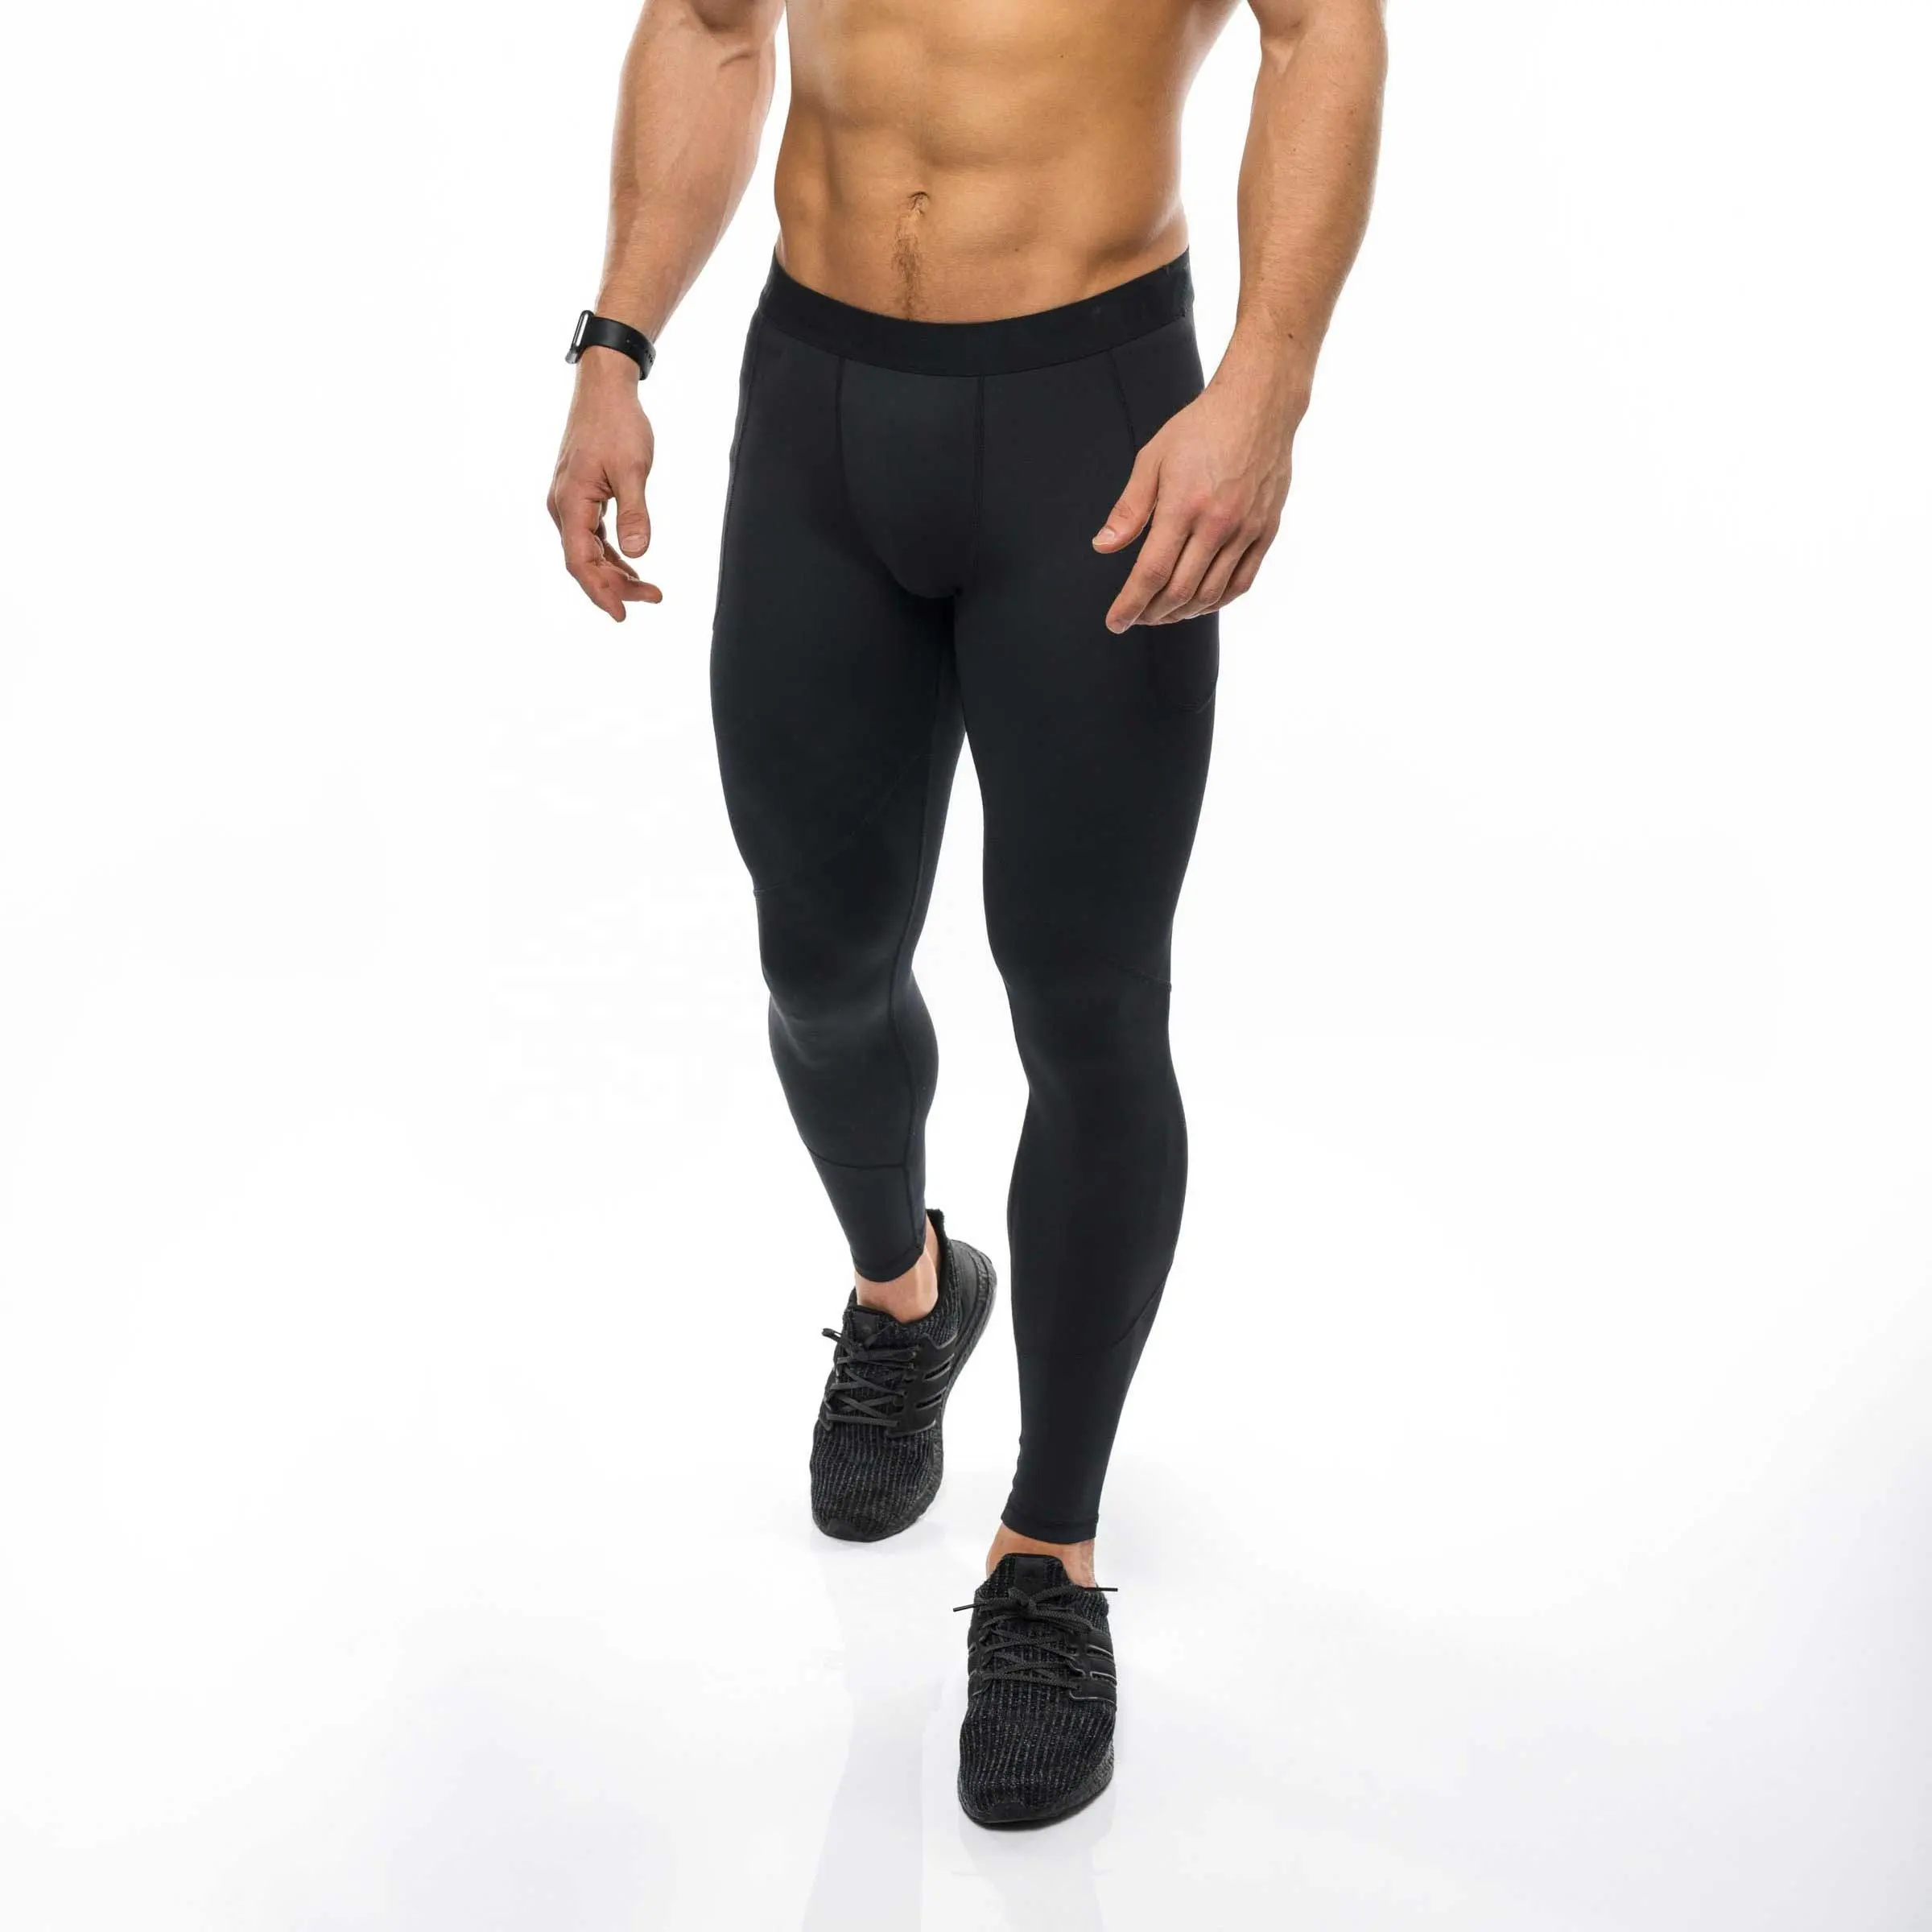 Gym Fitness Leggings Workout Compression Tights Customized Waistband Men's Running for Men Sportswear Seamless Knitted 50pcs